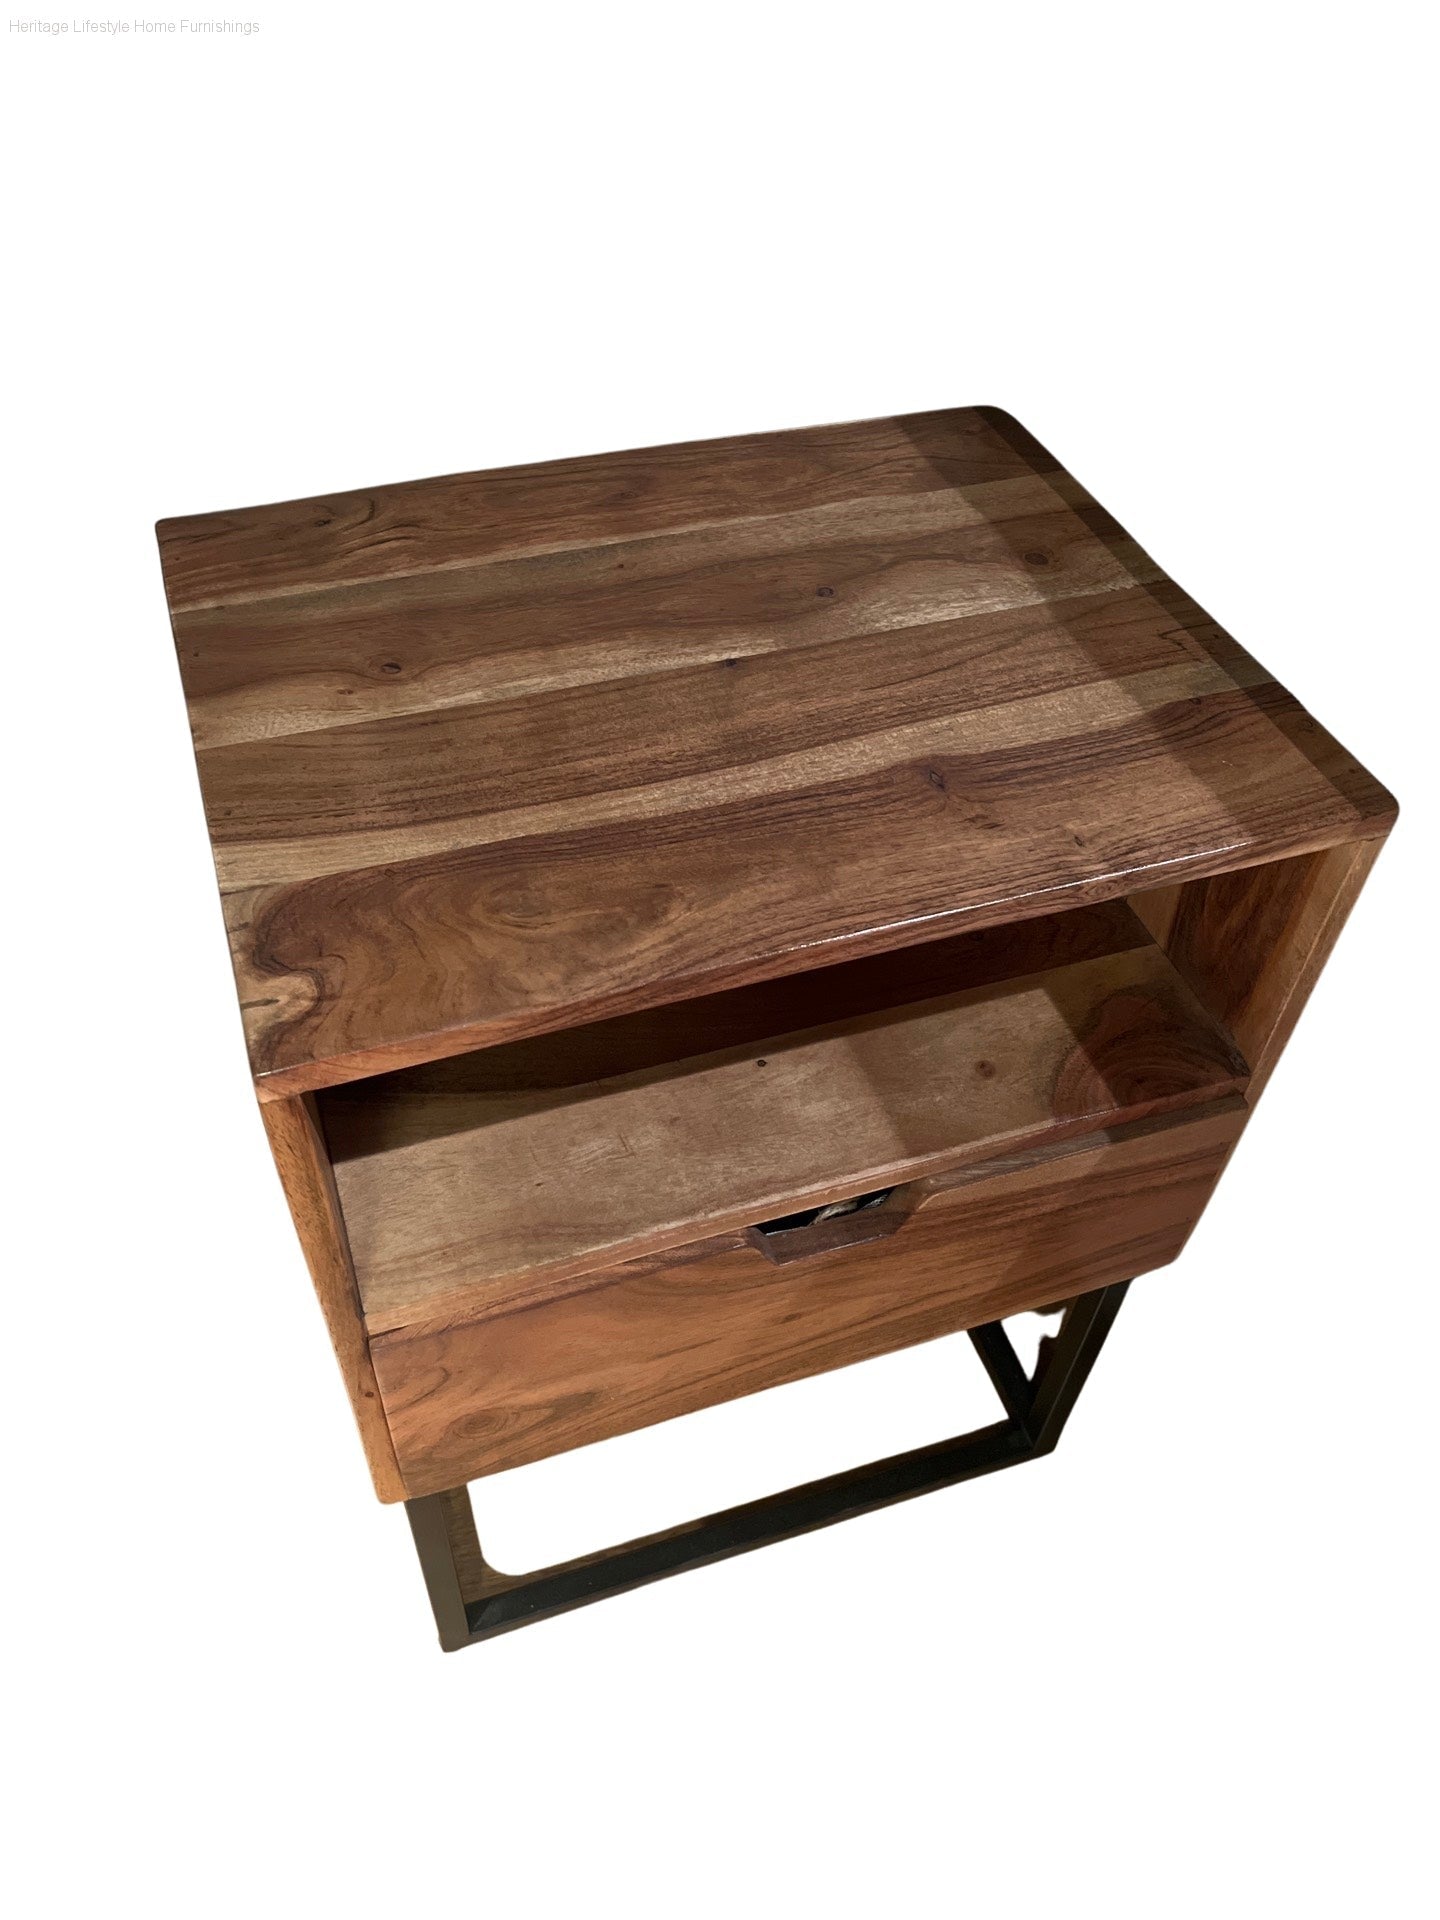 Occasional Tables - CL01032 1 Shelf + 1 Drawer Side Table